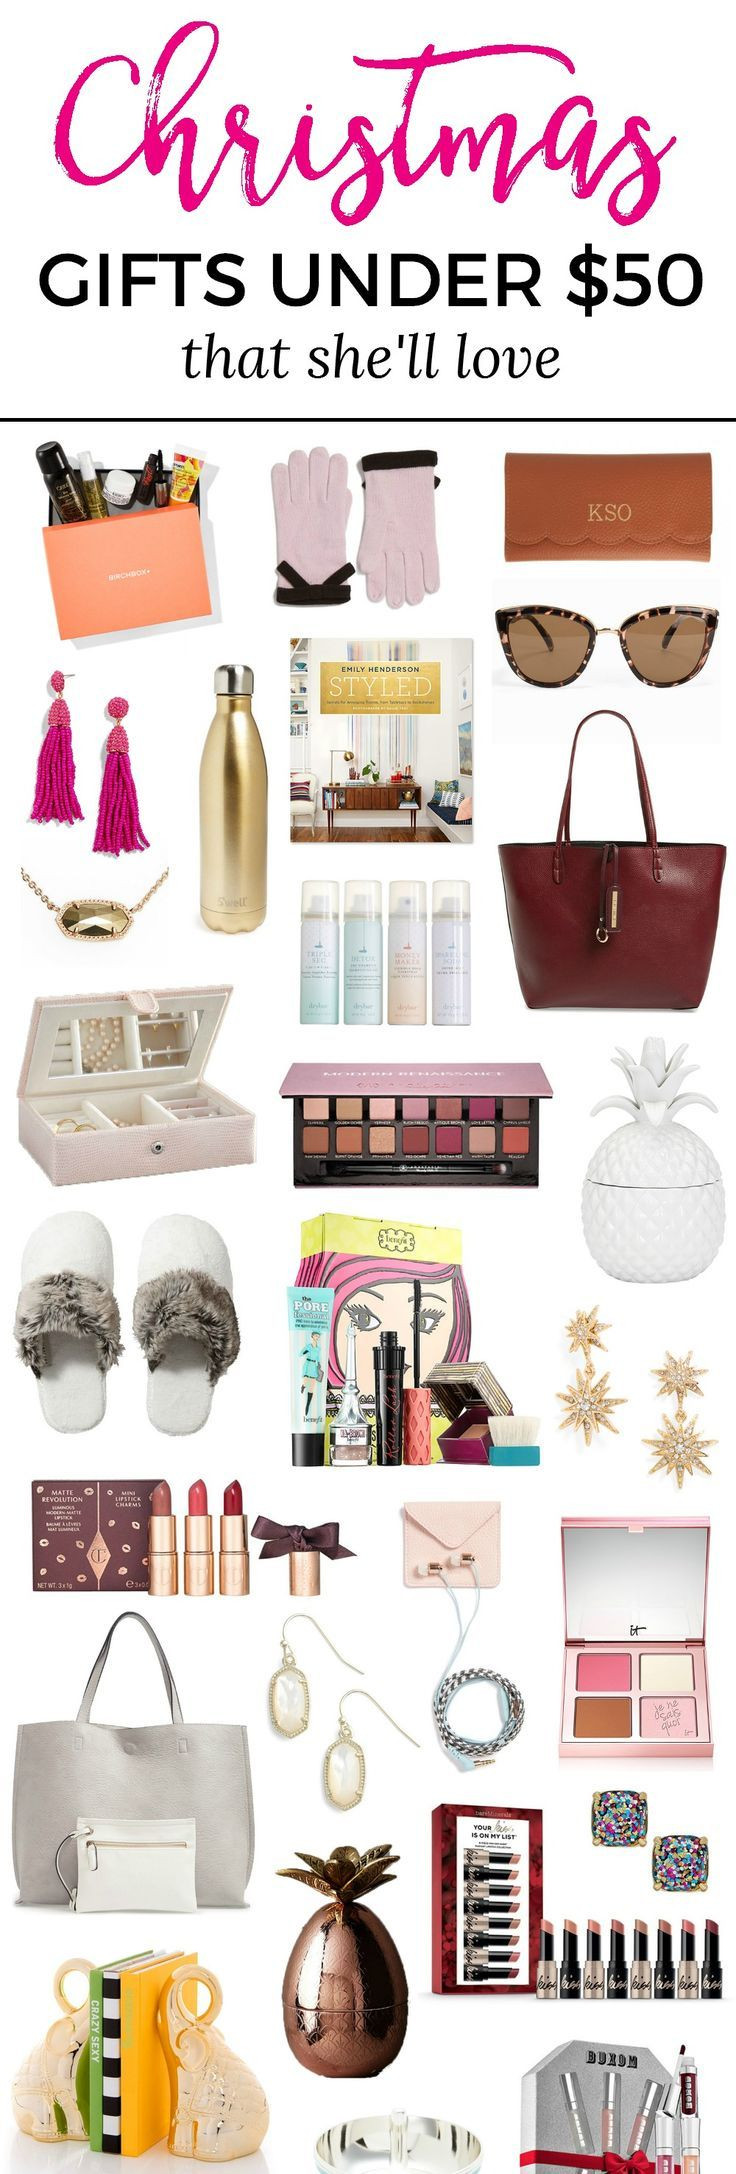 Best Birthday Gifts For Women
 The best Christmas t ideas for women under $50 You won